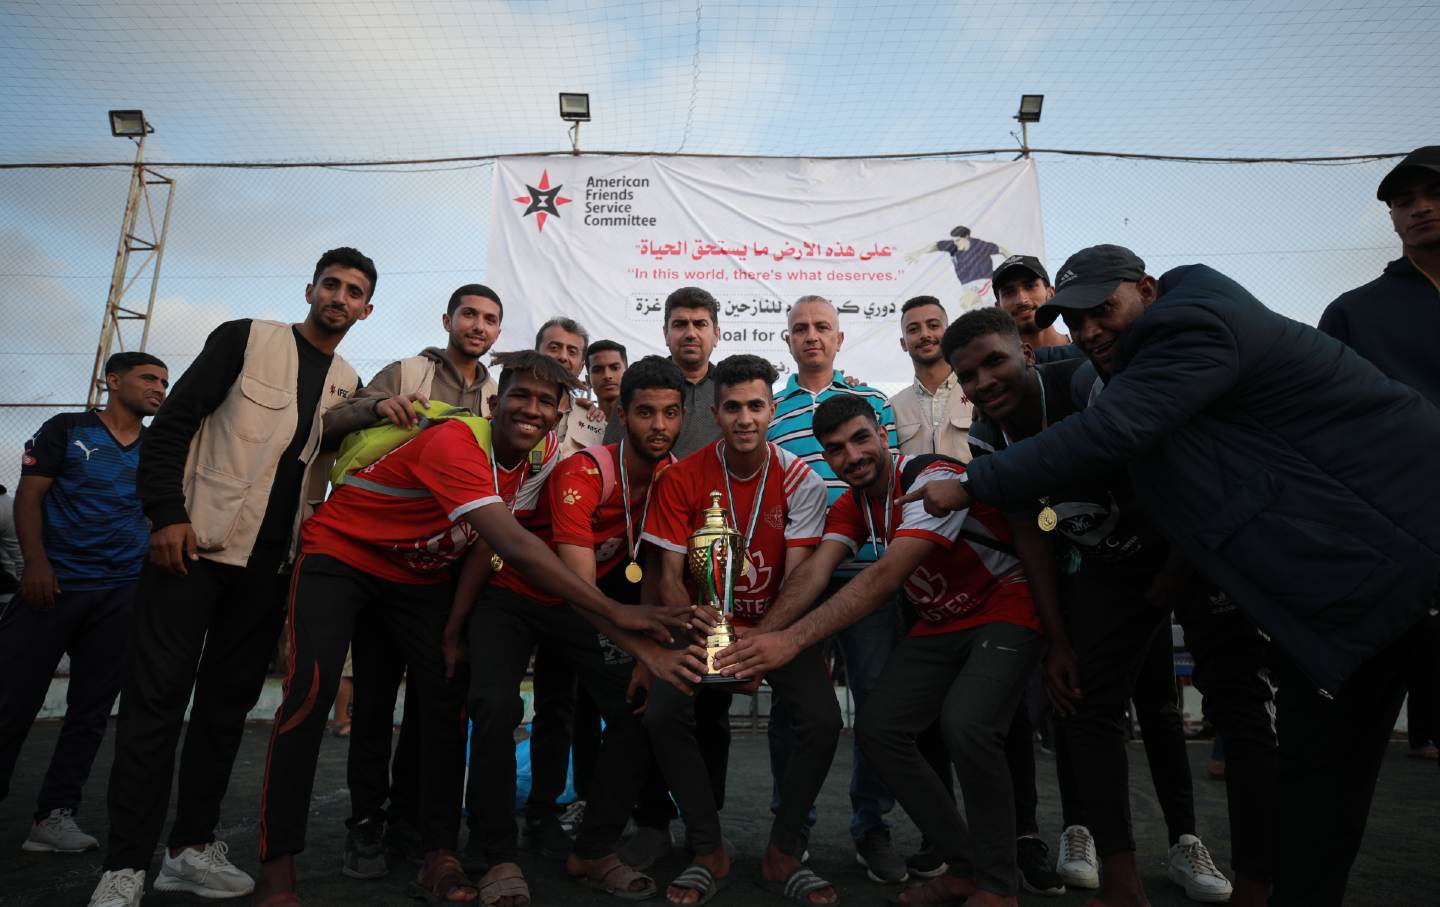 Winning team poses with trophy in Rafah.